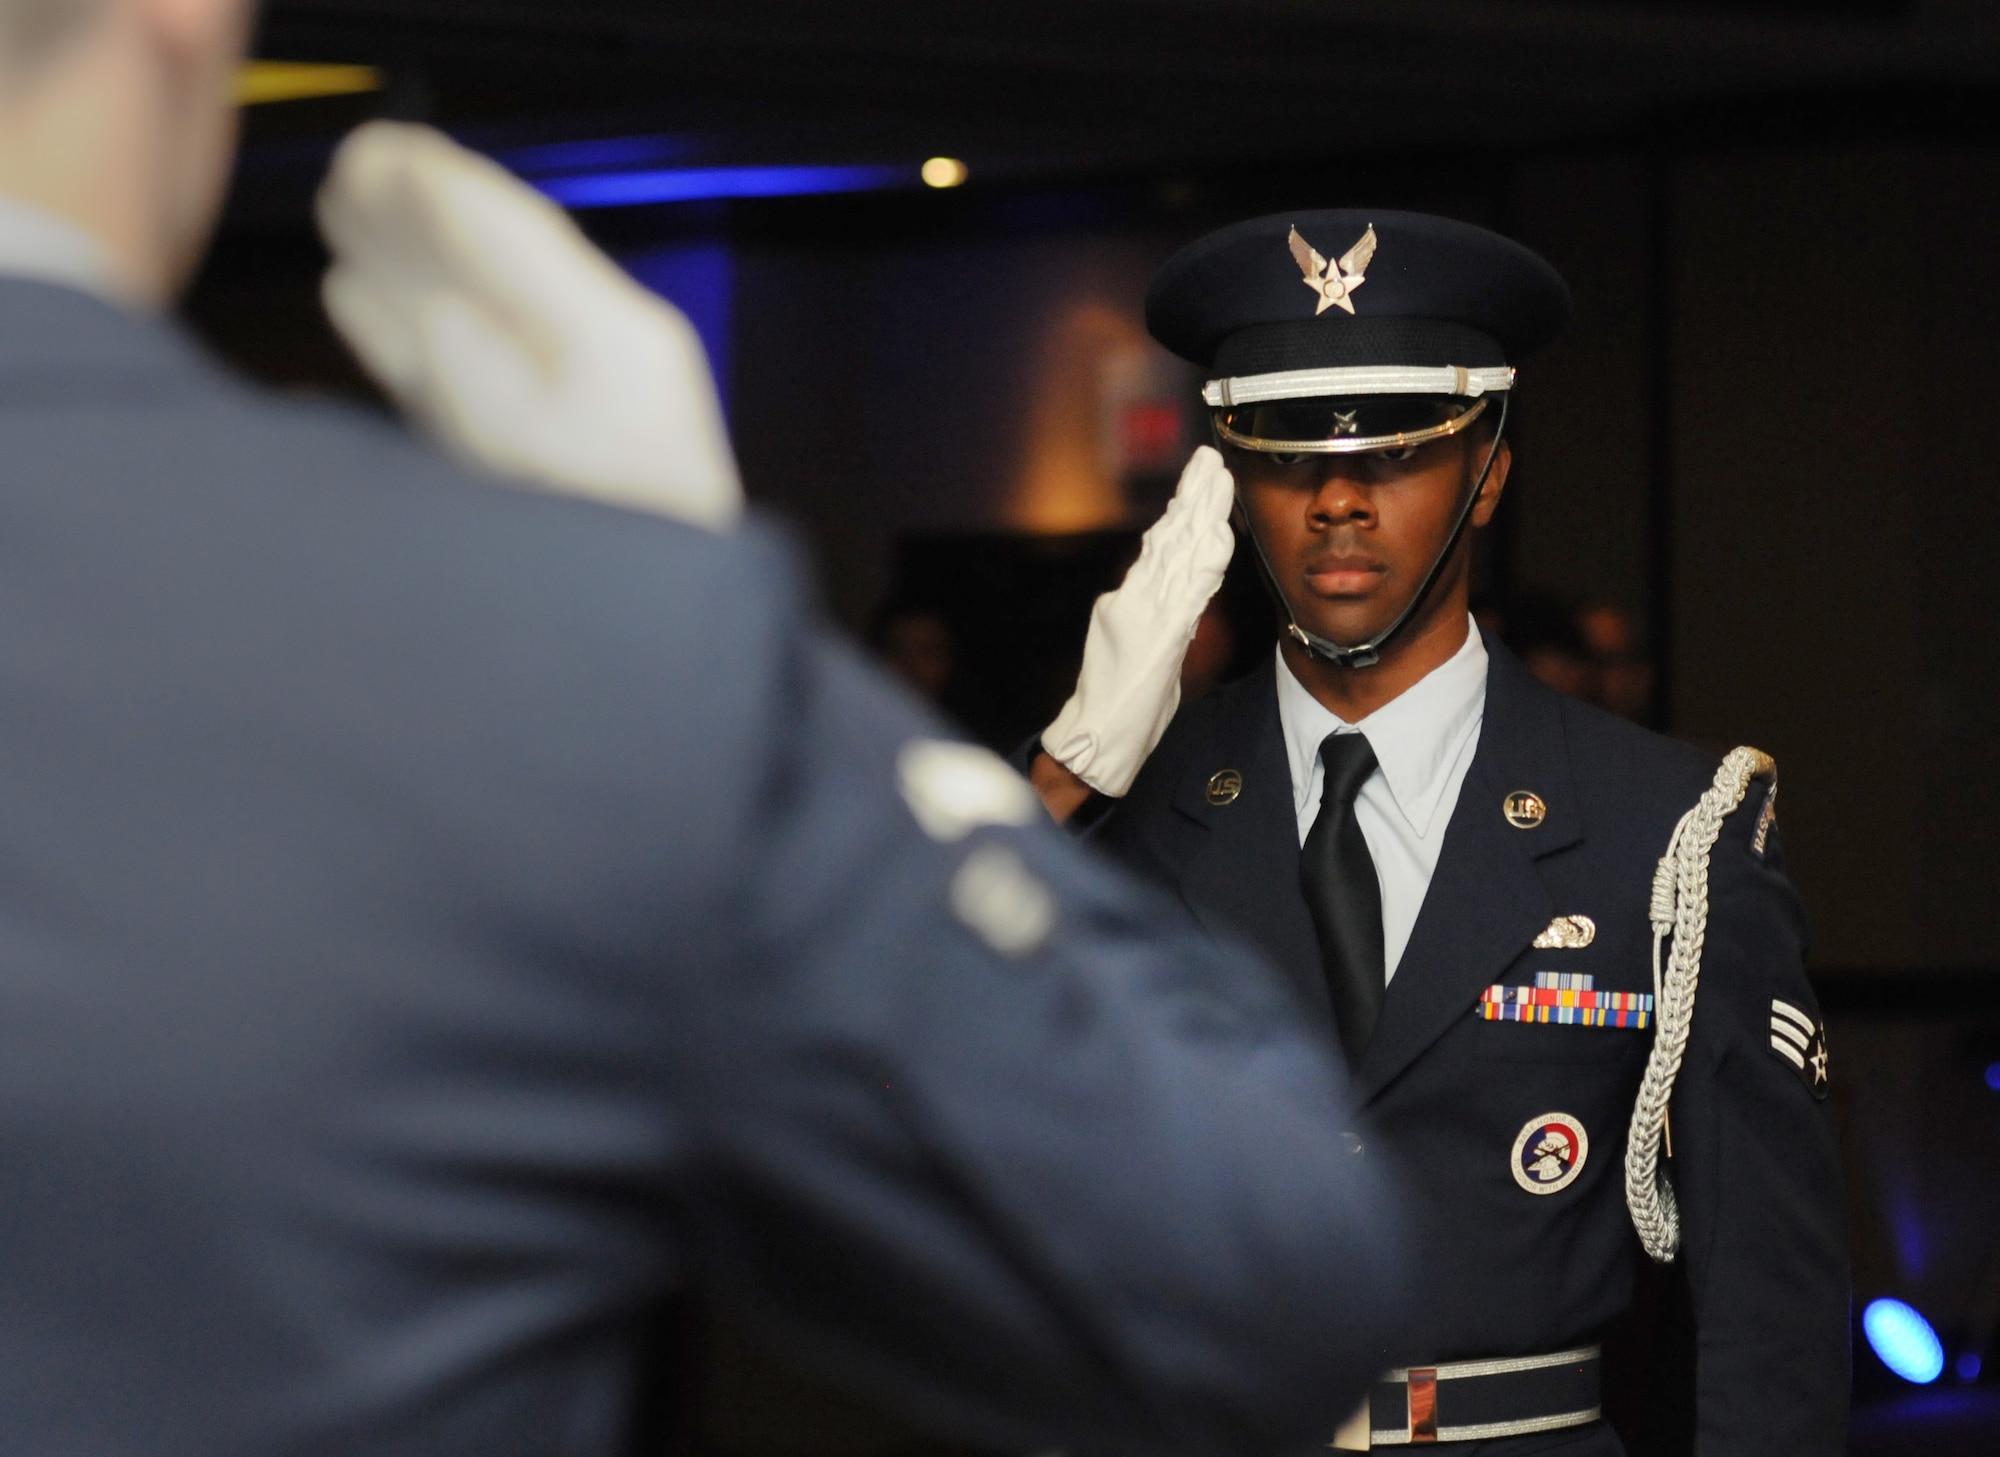 Senior Airman Sean Goddard, Keesler Honor Guard member, renders a salute while performing a POW/MIA table ceremony during the Keesler Air Force Ball at the Imperial Palace Casino Sept. 24, 2016, Biloxi, Miss. The event was sponsored by the Air Force Association John C. Stennis Chapter #332 to celebrate the Air Force’s 69th birthday and the base’s 75th anniversary. (U.S. Air Force photo by Kemberly Groue/Released)